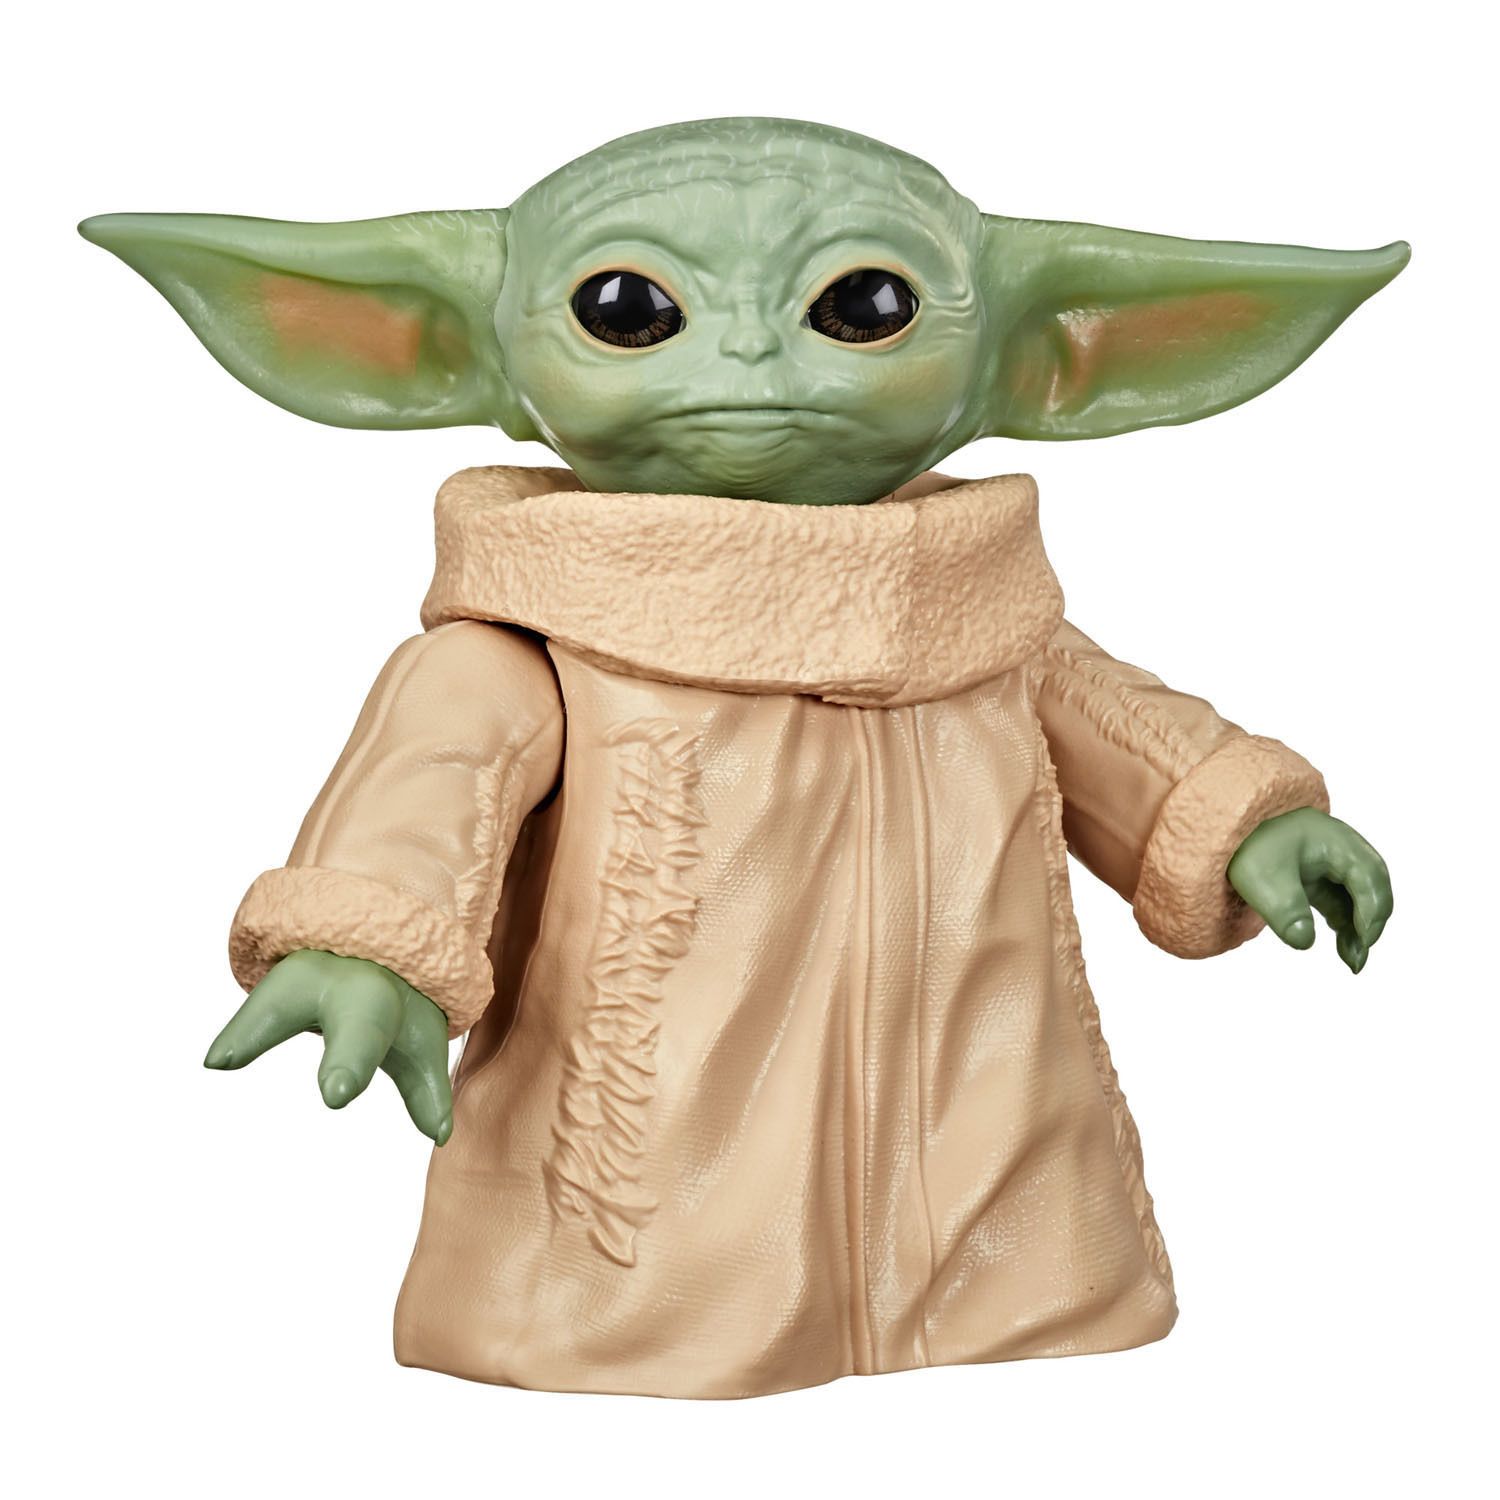 Image for Hasbro Star Wars The Child 6.5-inch Figure by at Kohl's.